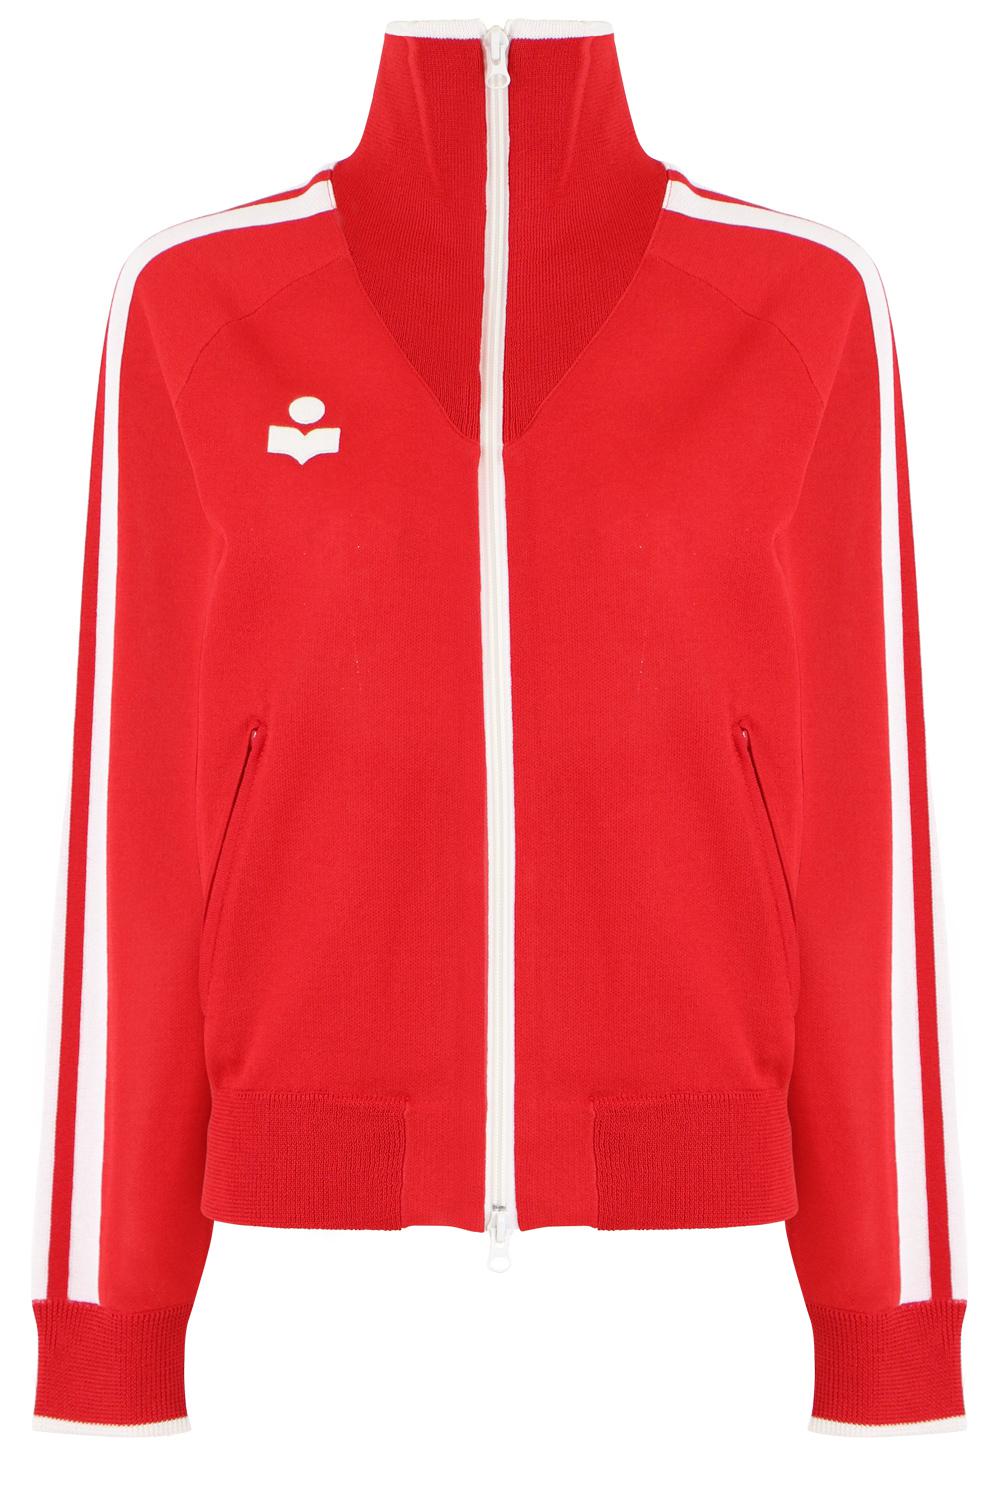 Isabel Marant Etoile L/s Darcey Track Jacket Red in Red - Lyst